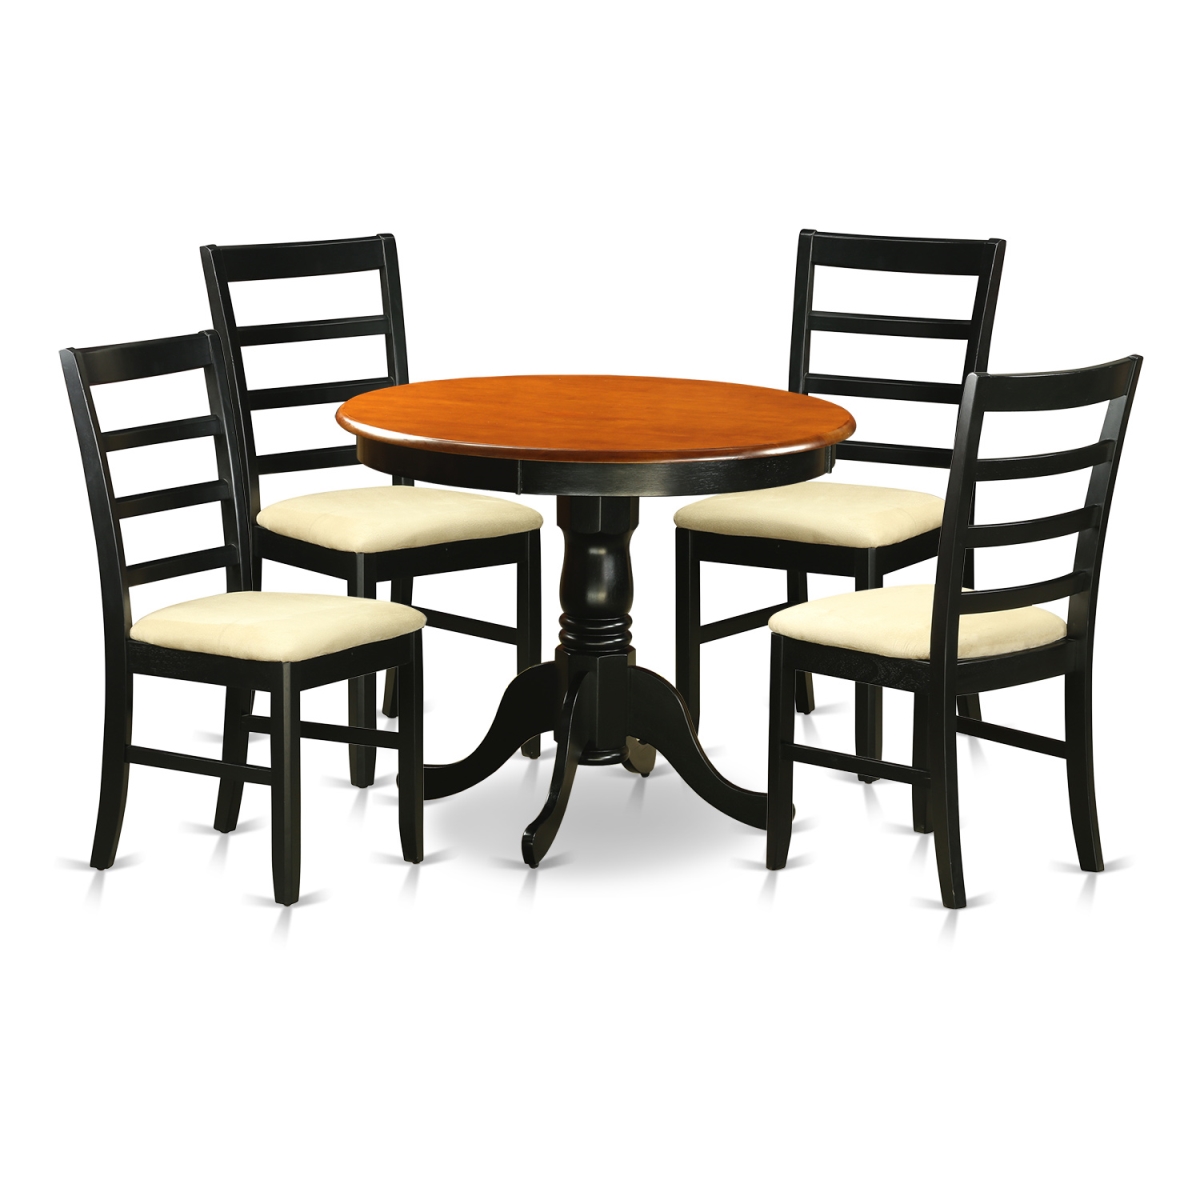 Picture of East West Furniture ANPF5-BLK-C Dining Furniture Set with 4 Microfiber Chairs, Black & Cherry - 5 Piece